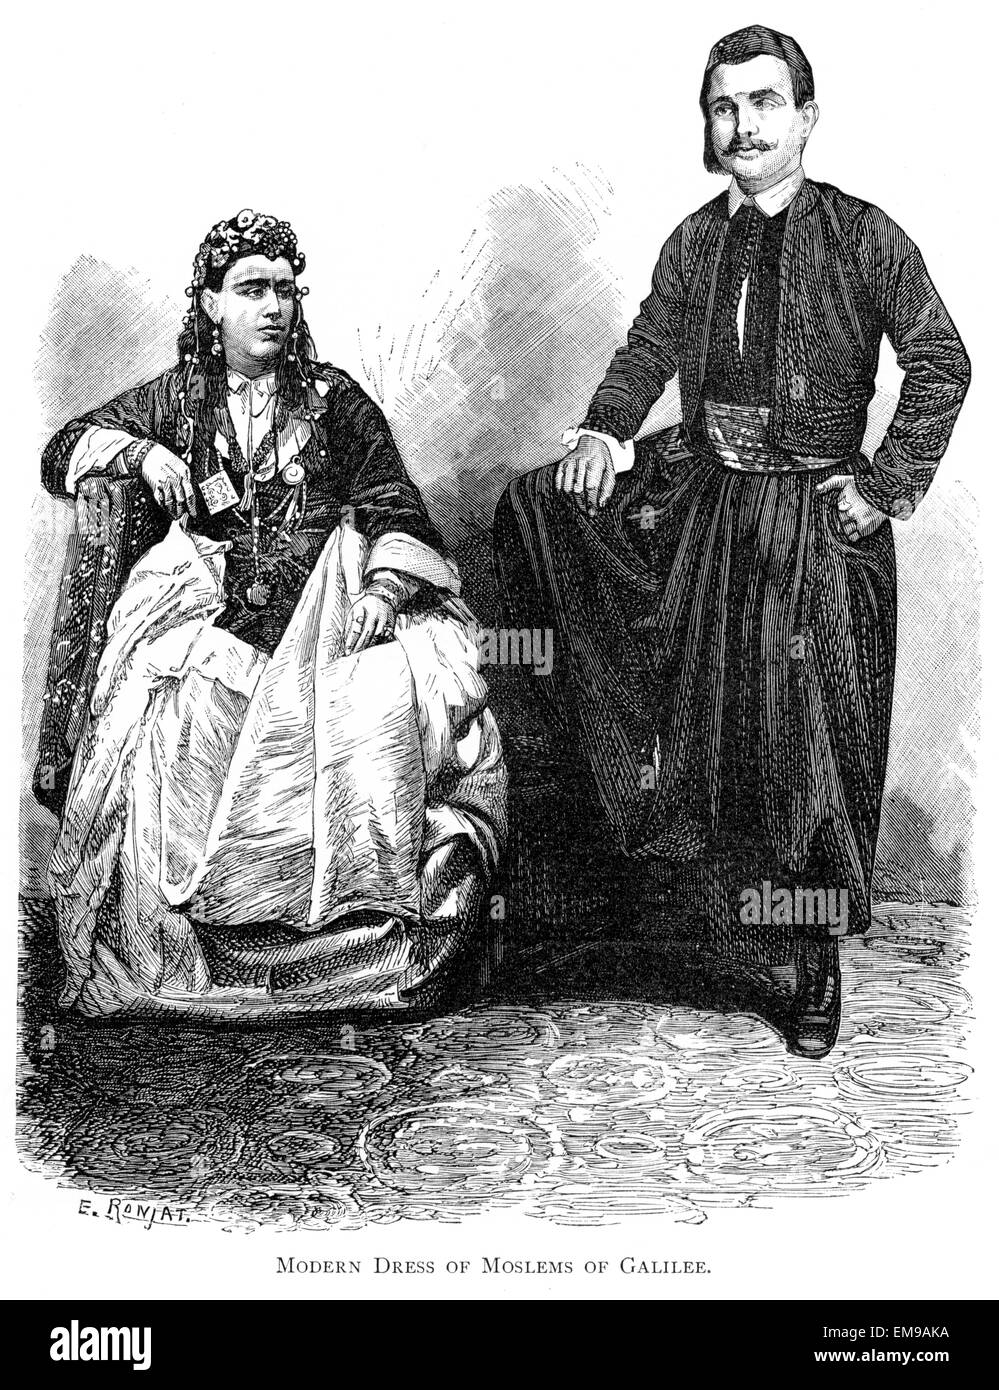 An engraving of Modern Dress of Moslems of Galilee scanned at high resolution from a book printed in 1889. Stock Photo